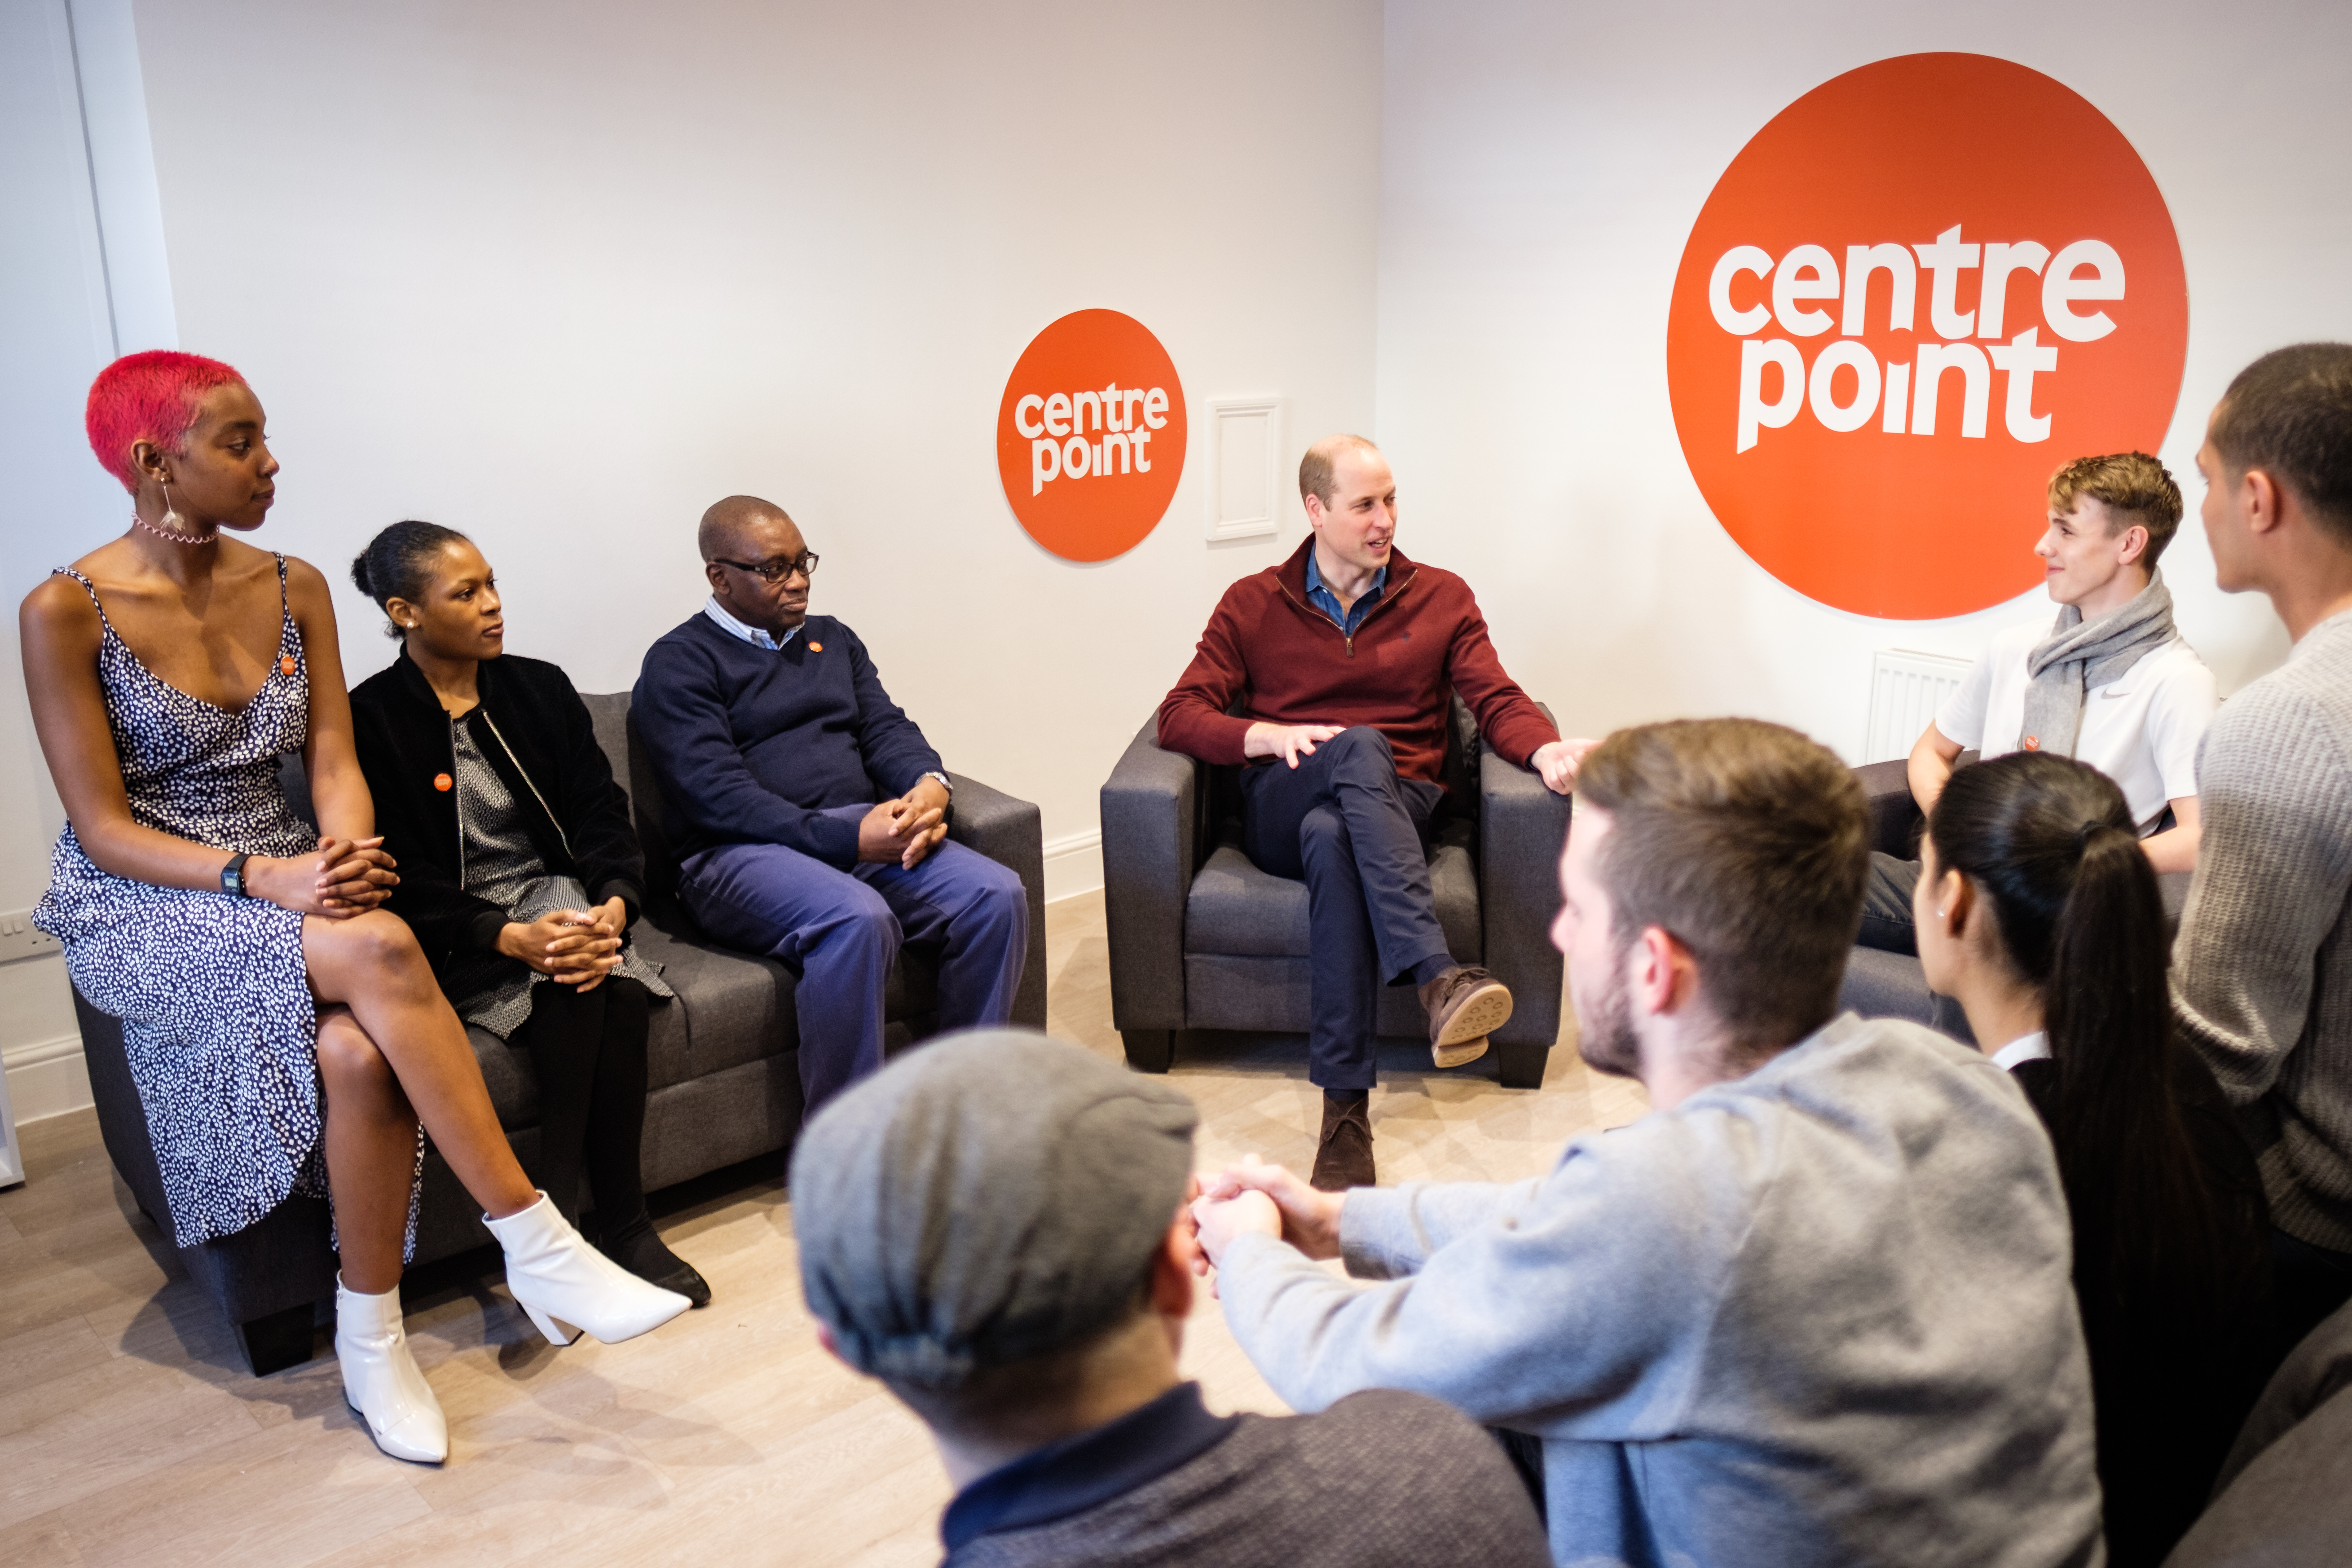 The Duke of Cambridge visits Centrepoint's new Apprenticeship House, as he marks 50 years of the homelessness charity.